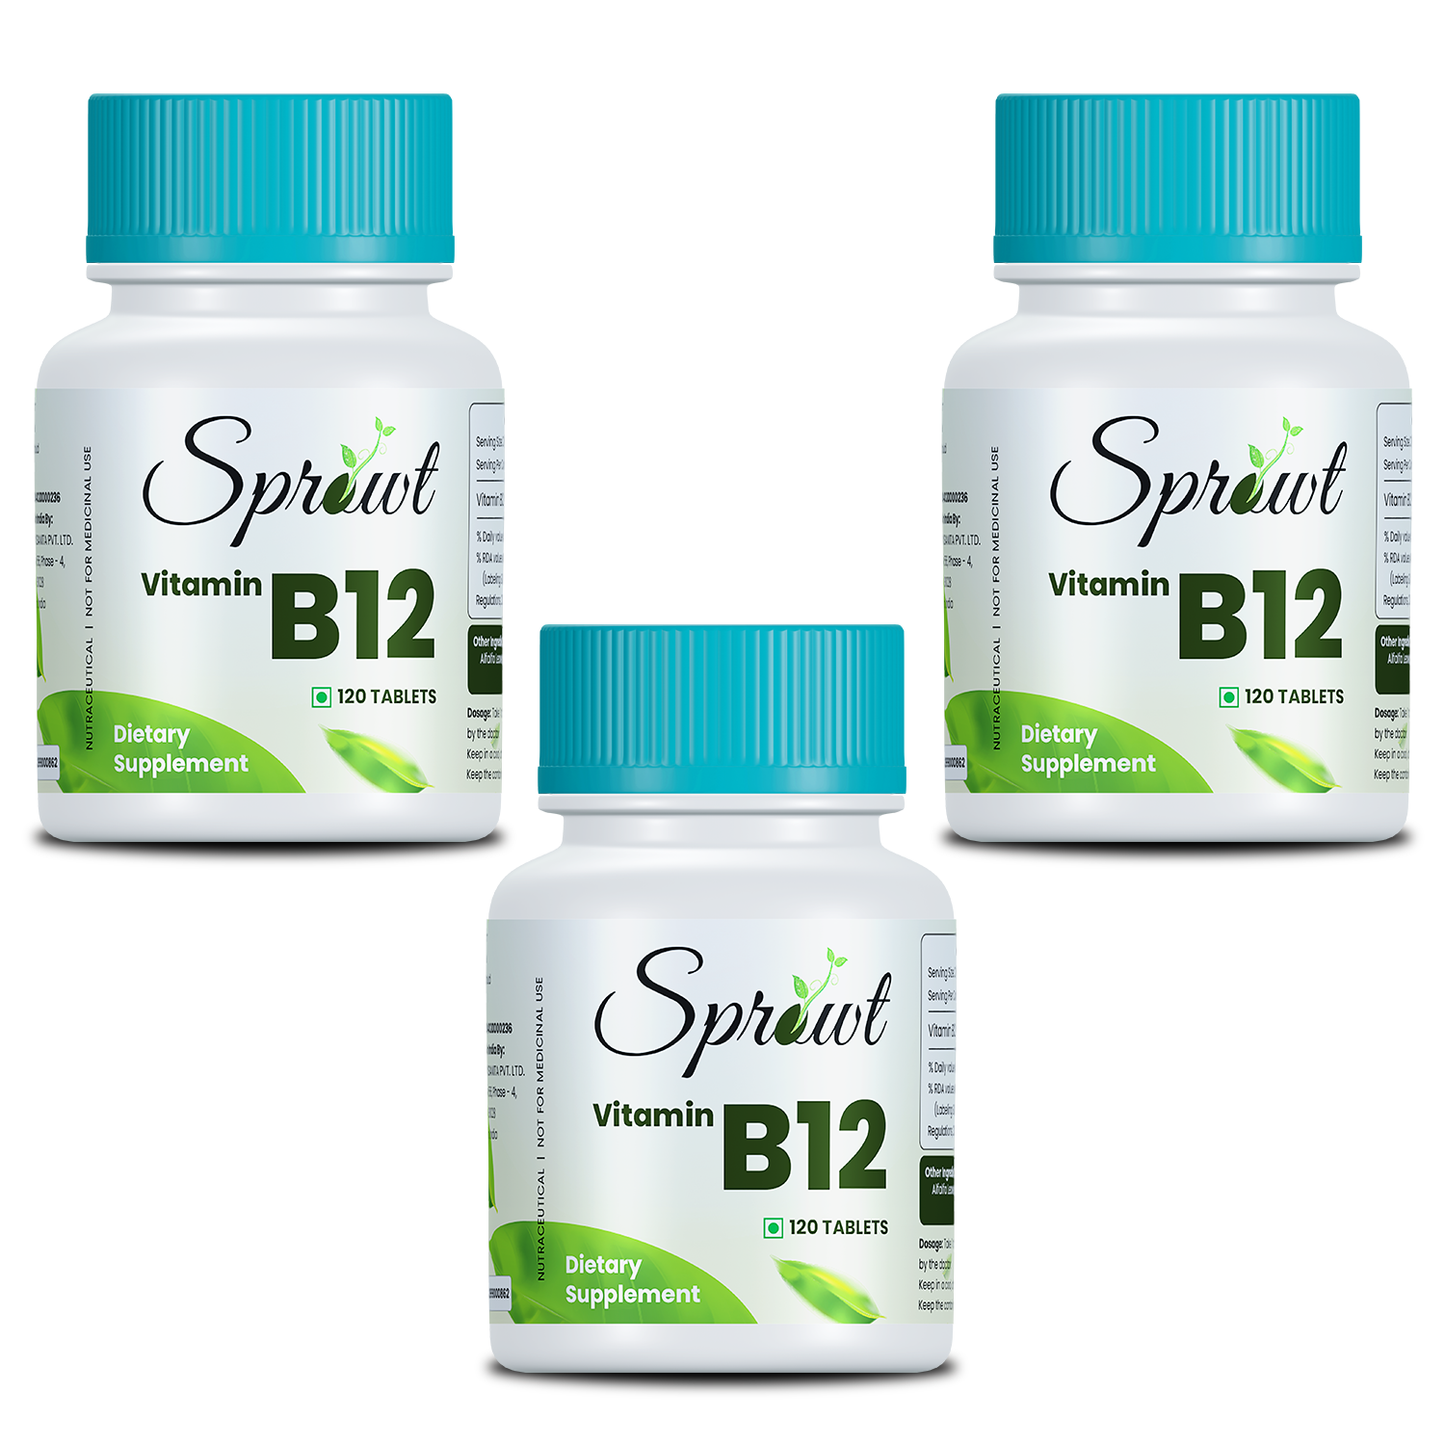 Sprowt Plant Based Vitamin B12 Capsule | Pack of 3, 120 Tablets Each